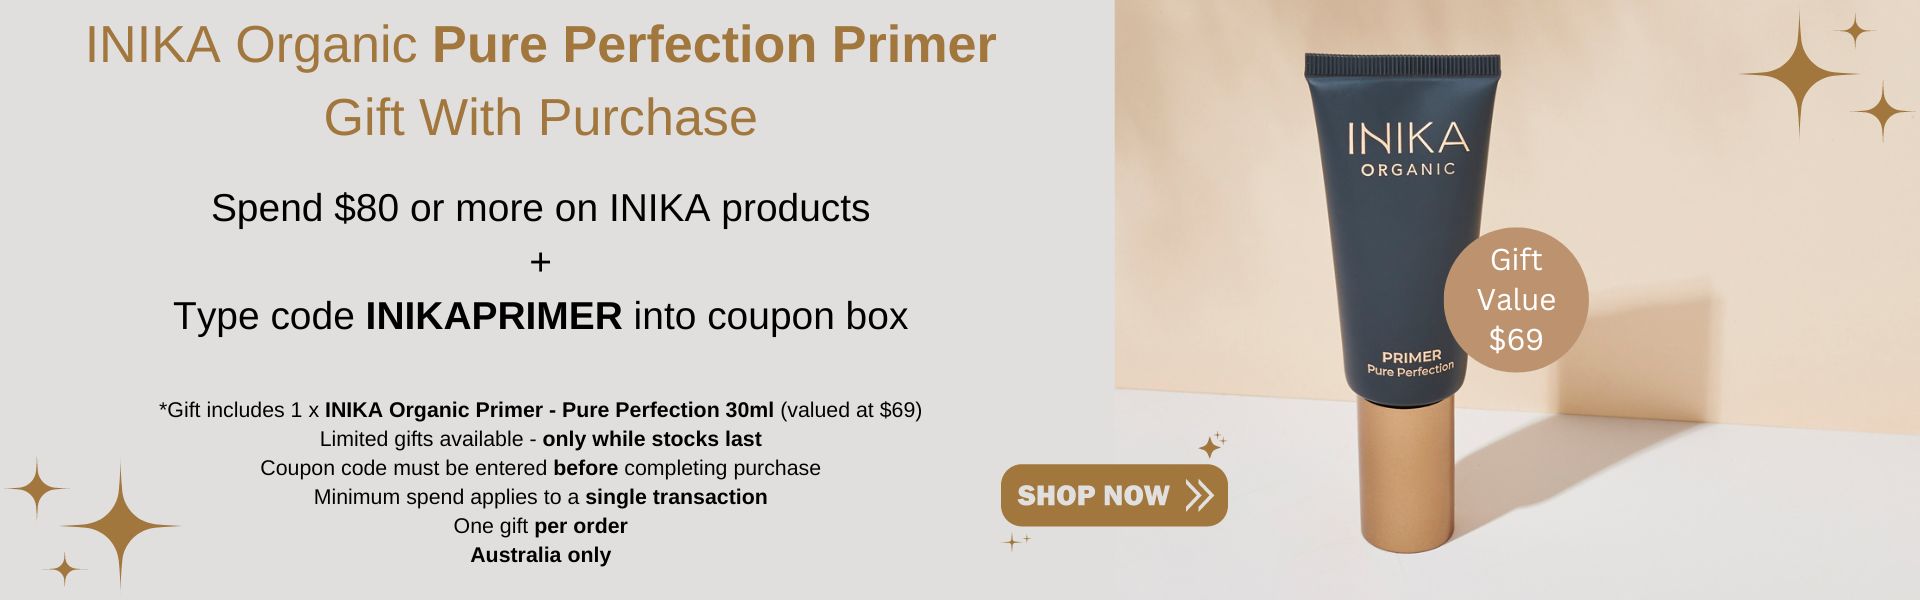 INIKA Organic Pure Perfection Primer Gift With Purchase at Naturally Safe Cosmetics